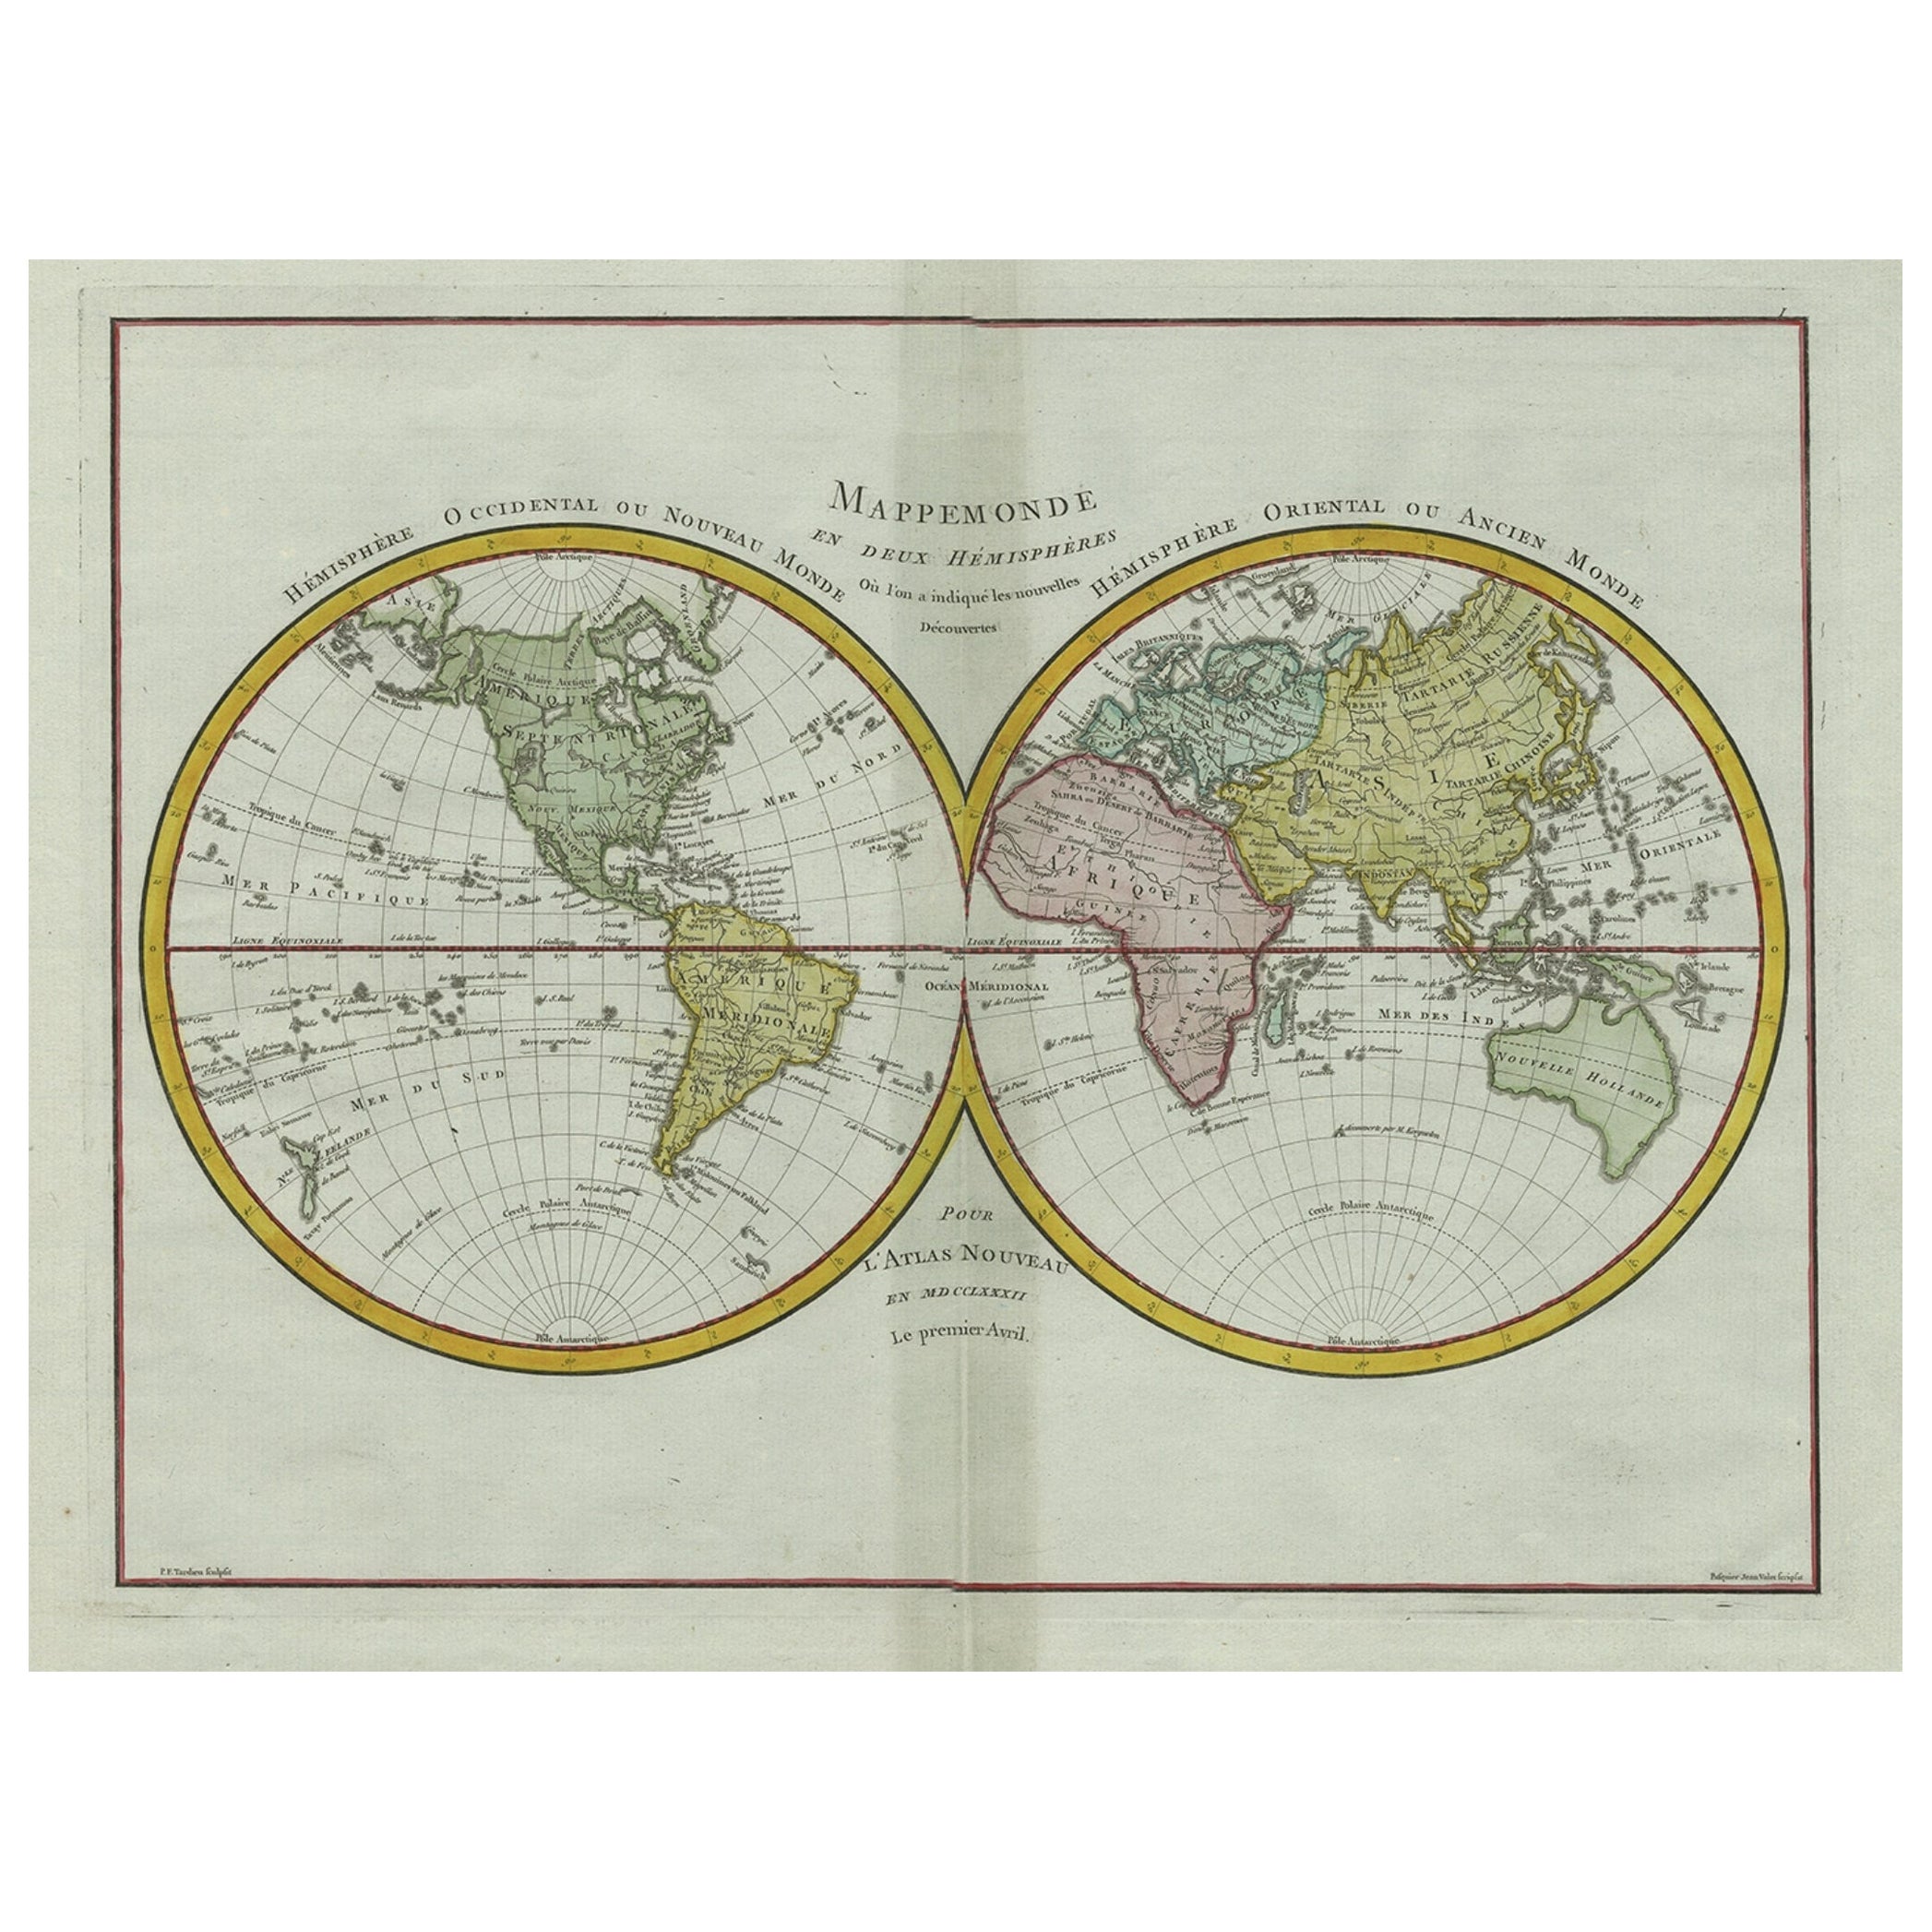 Original Engraved Antique Map of the World, Colorful and Decorative, C.1780